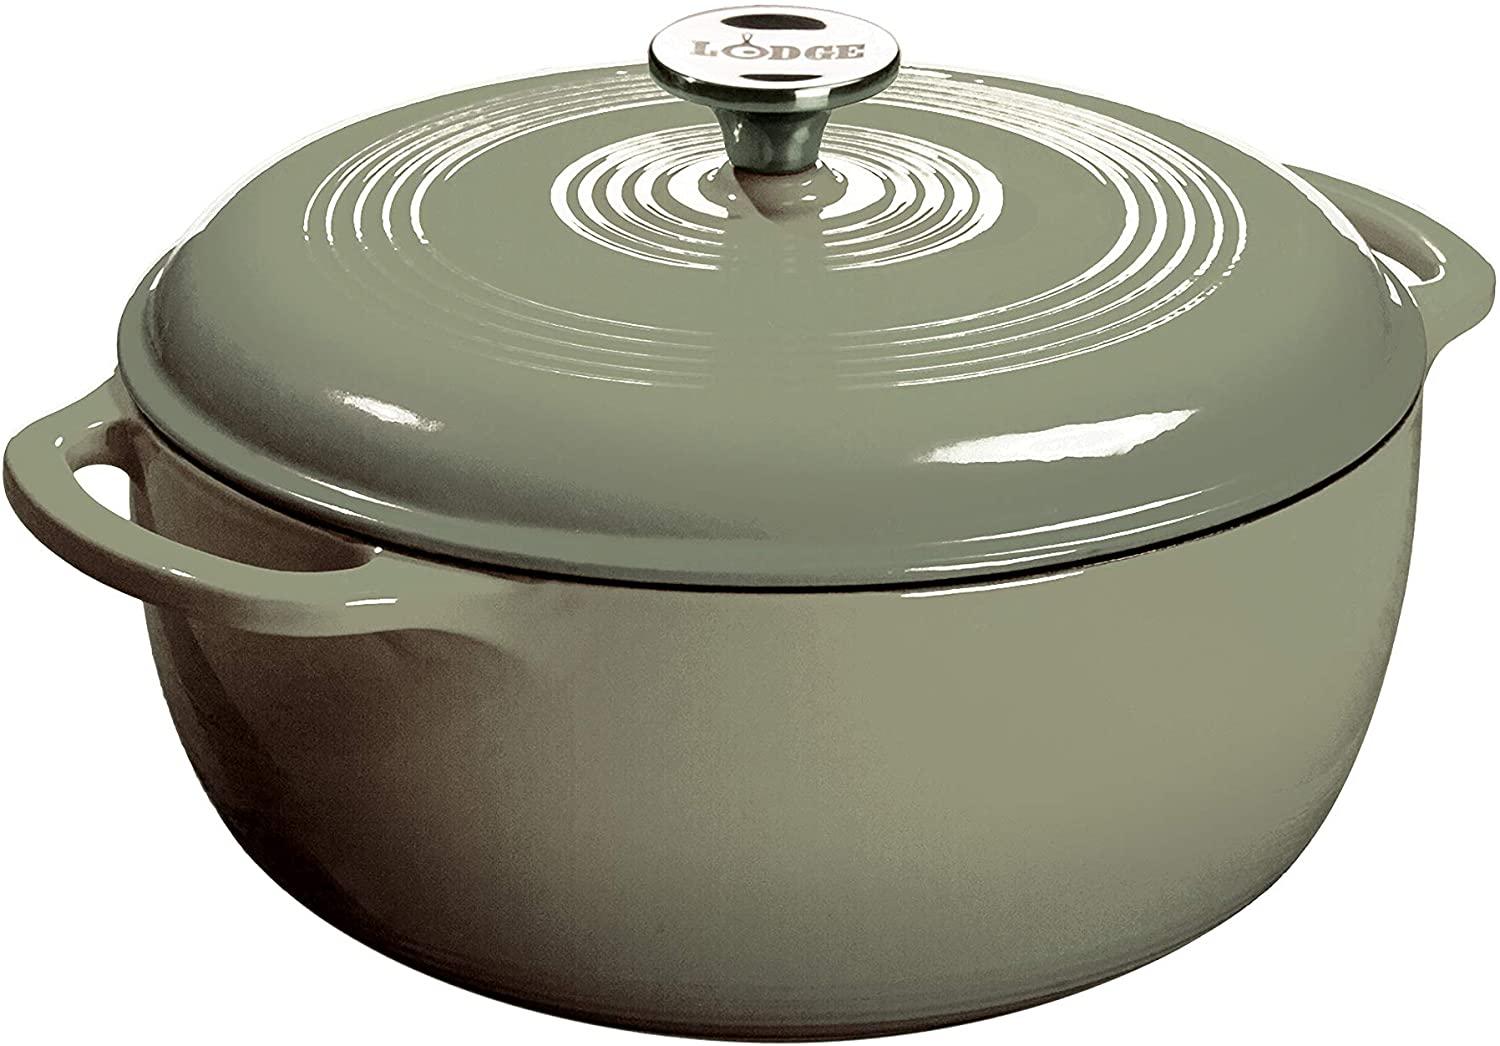 Lodge Cast Iron Enameled Dutch Oven for $58.85 Shipped